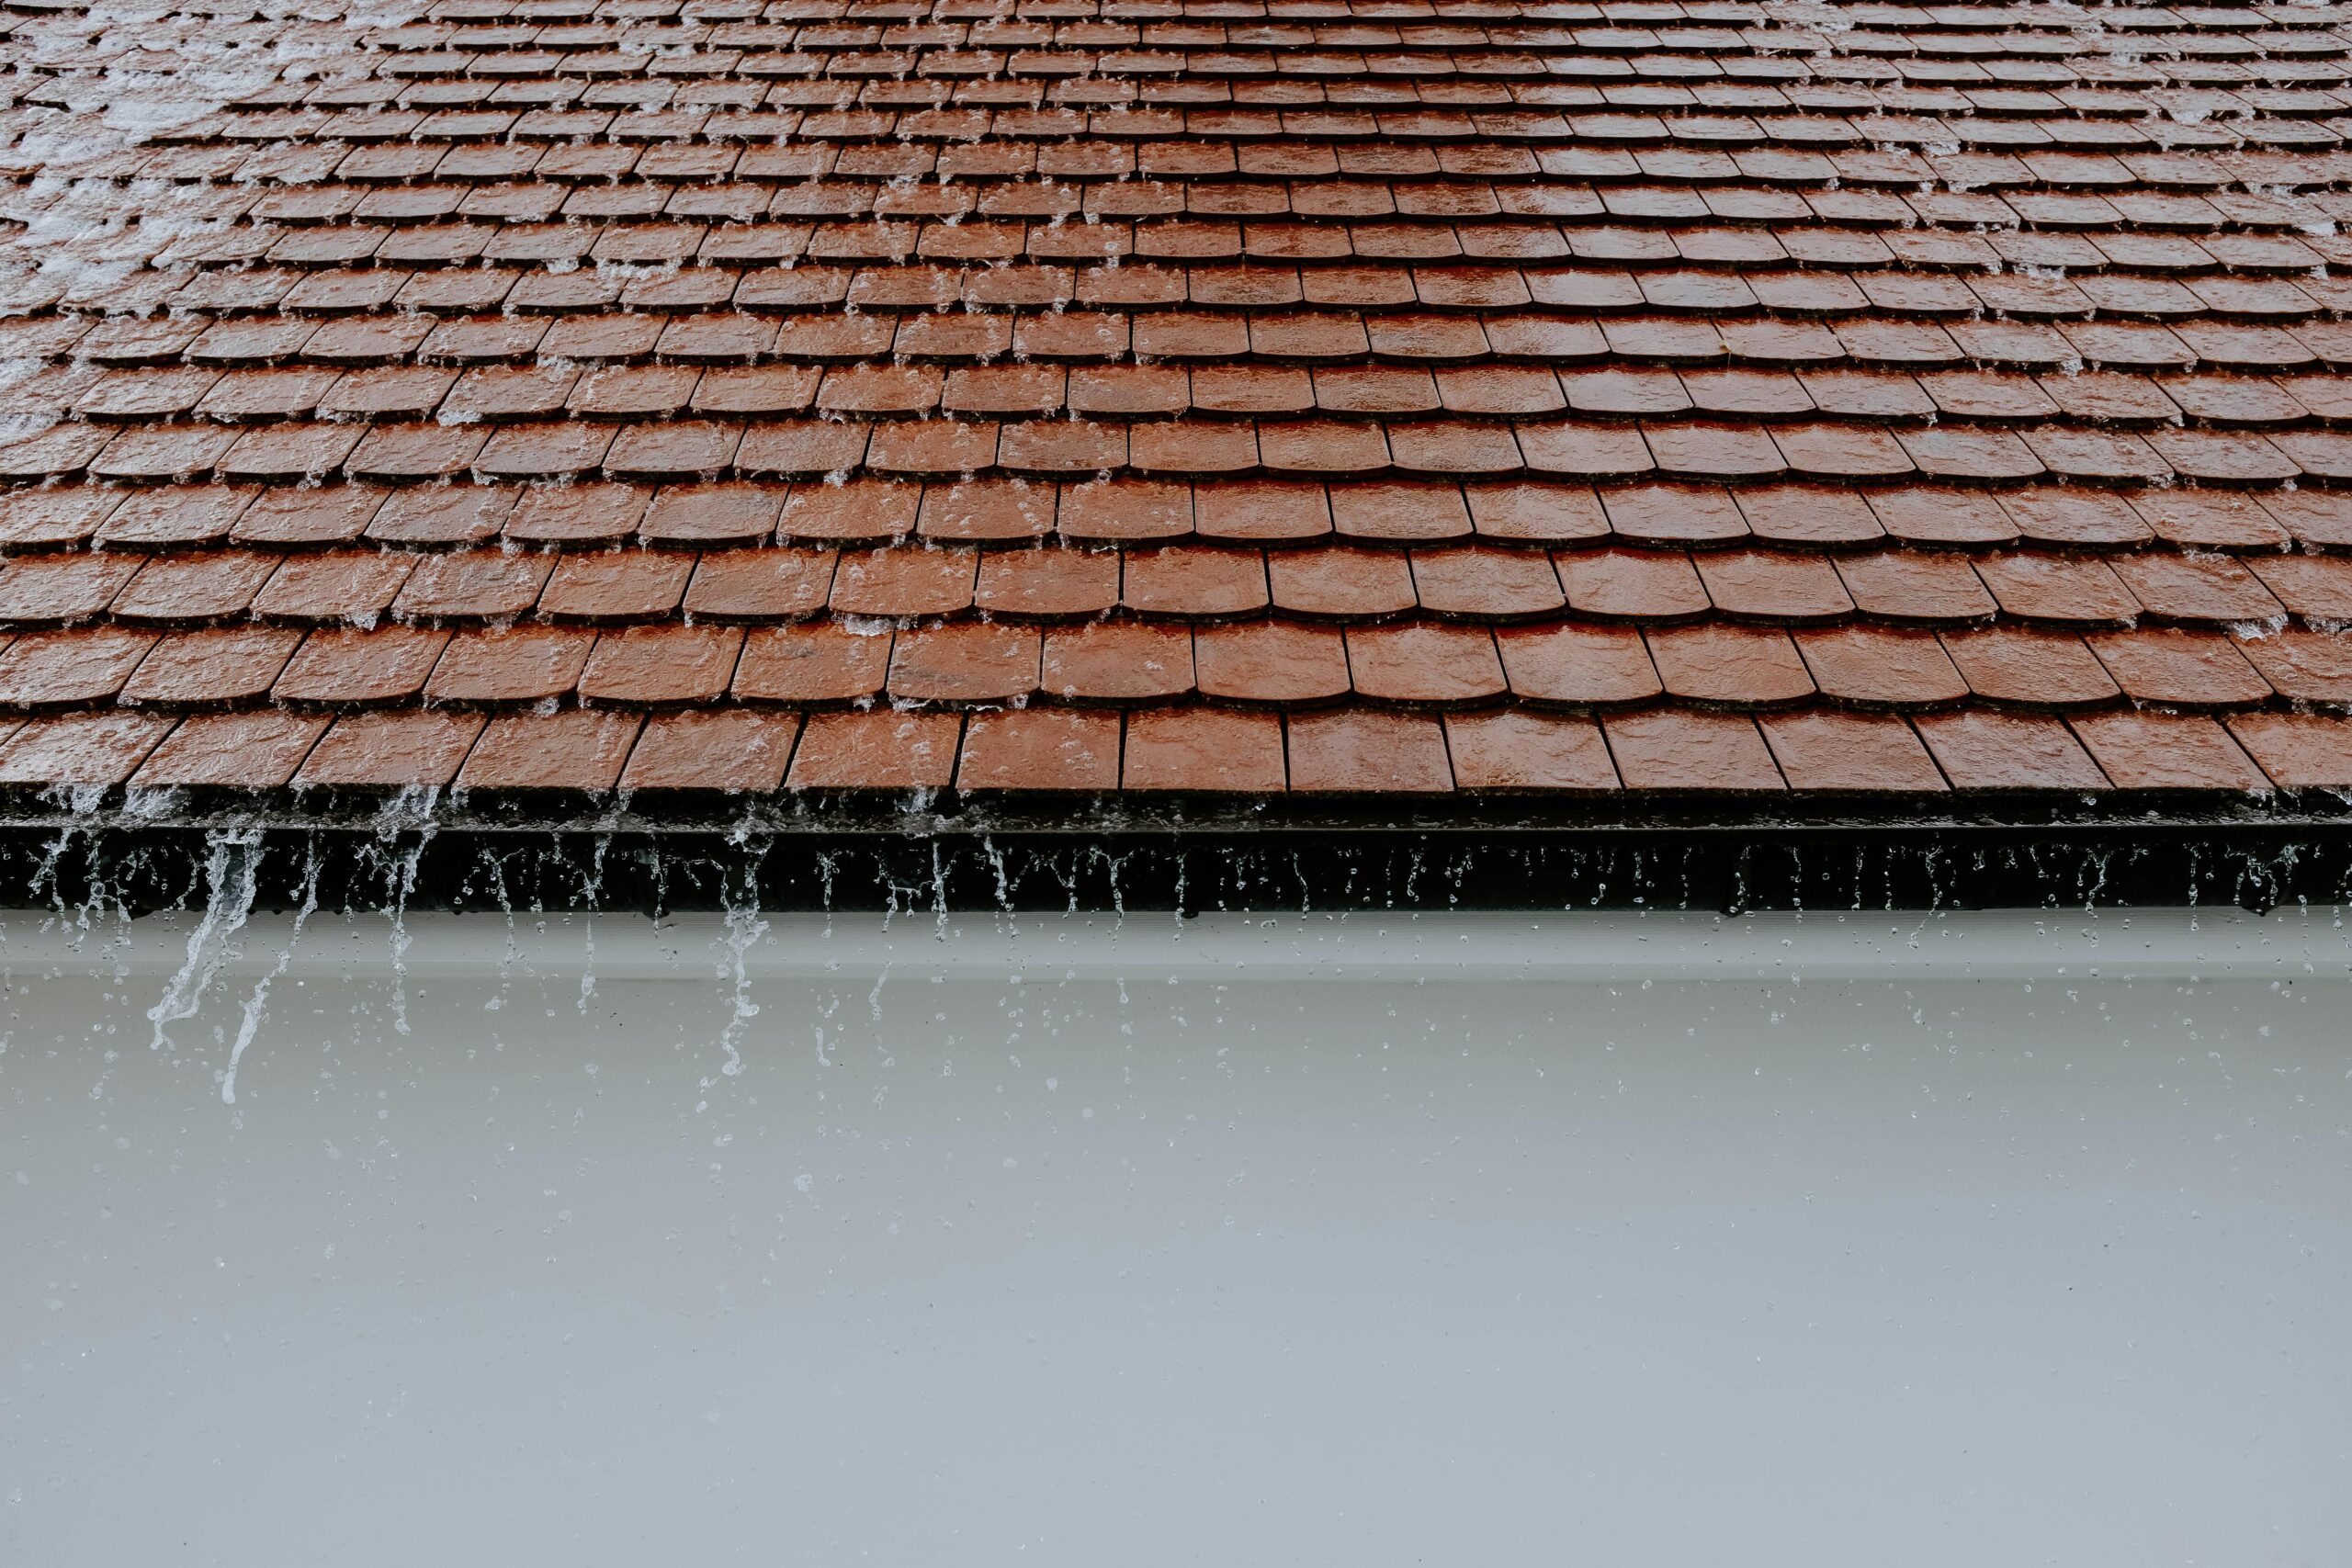 Water splashing on top of a roof